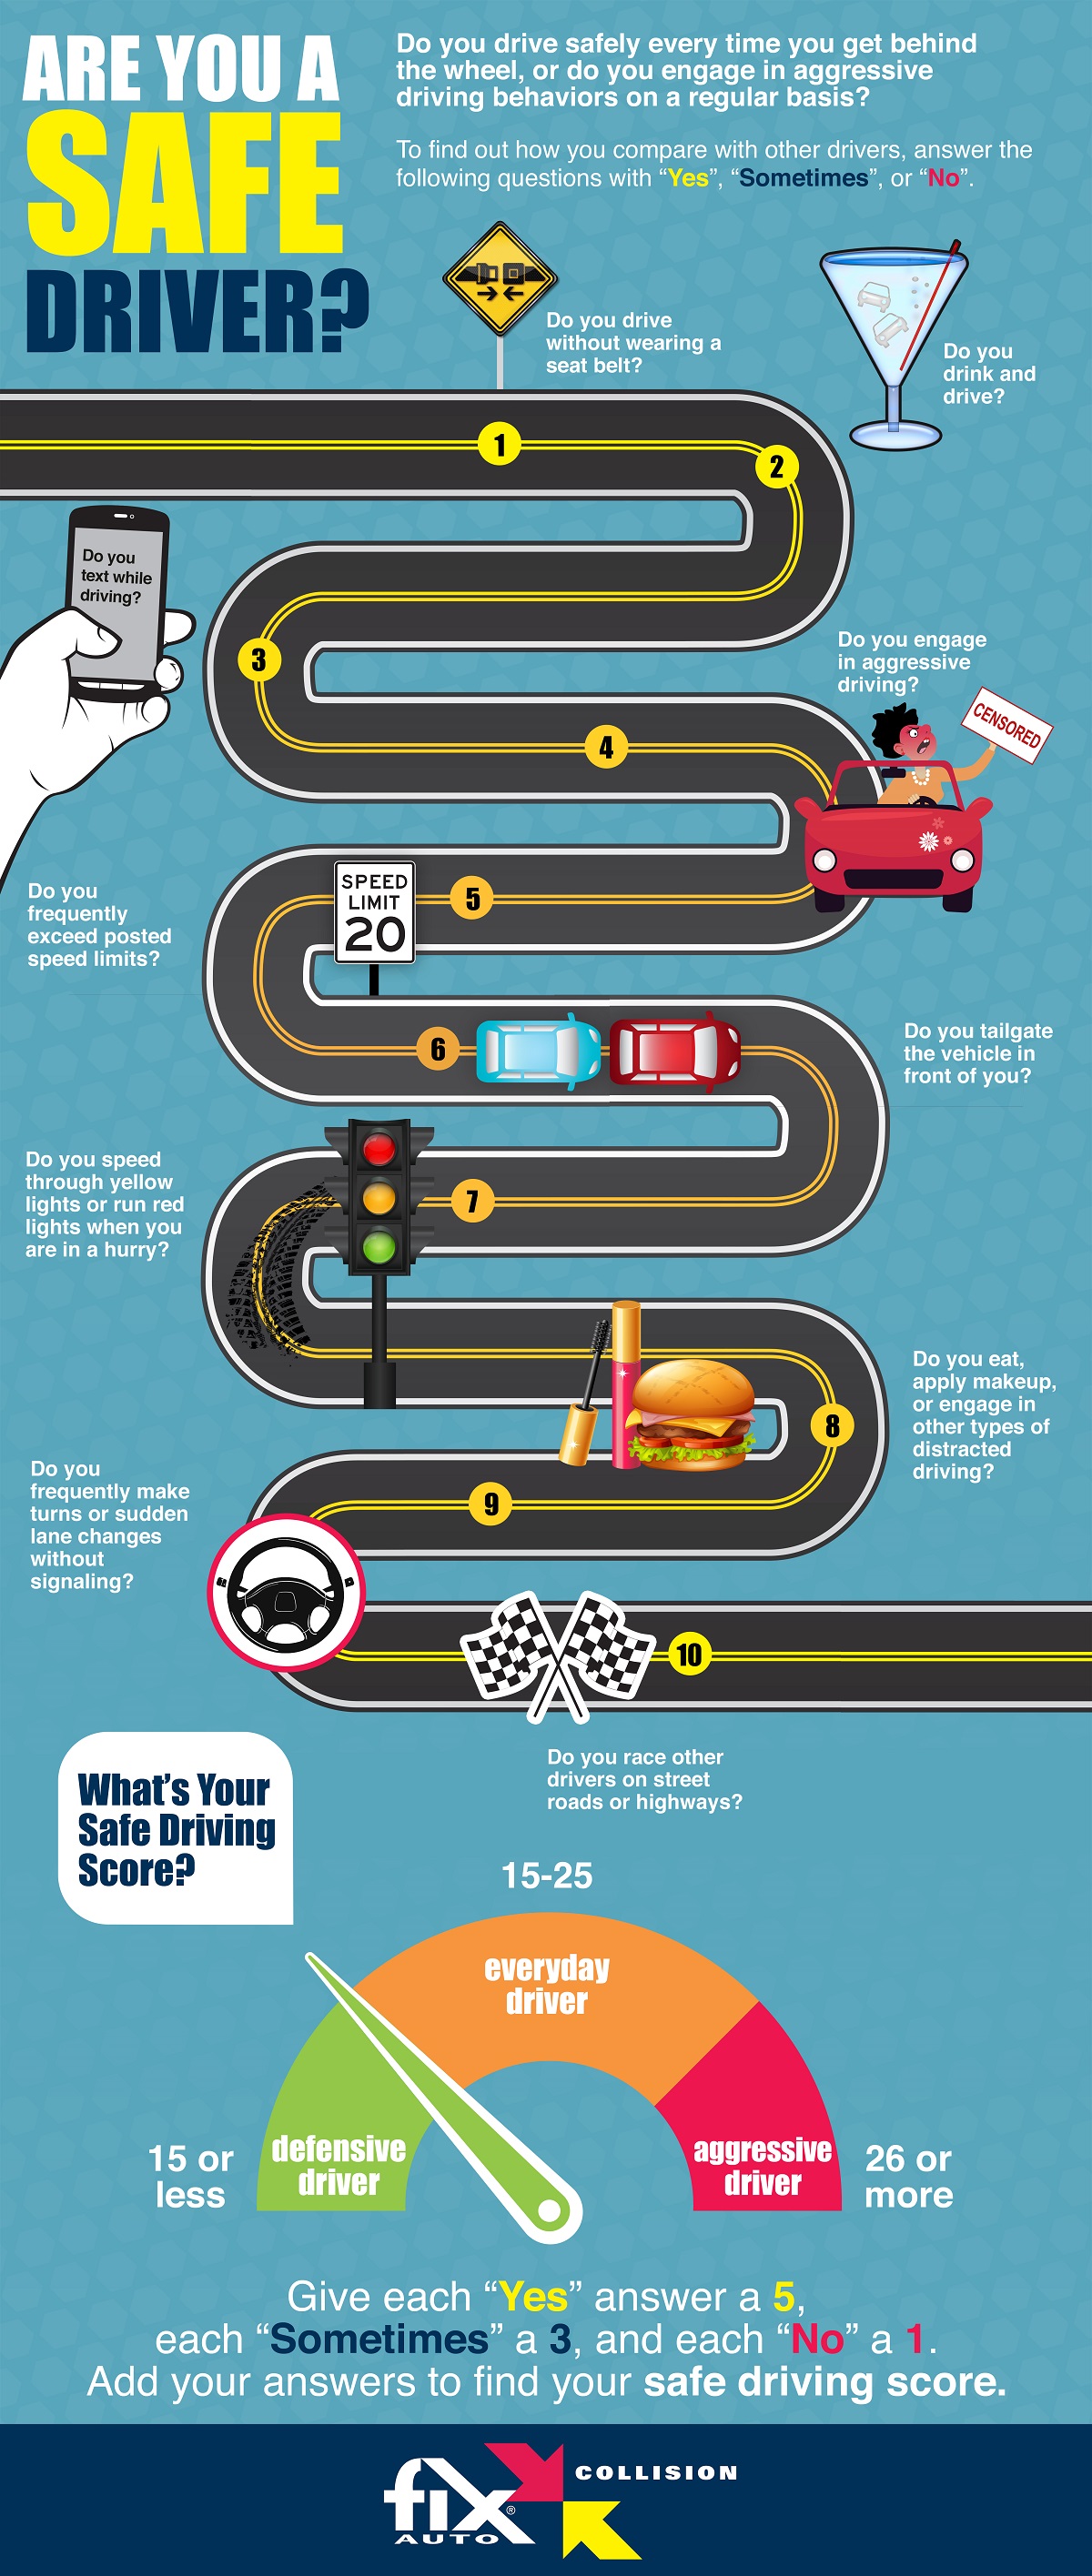 Are You a Safe Driver? | Visual.ly